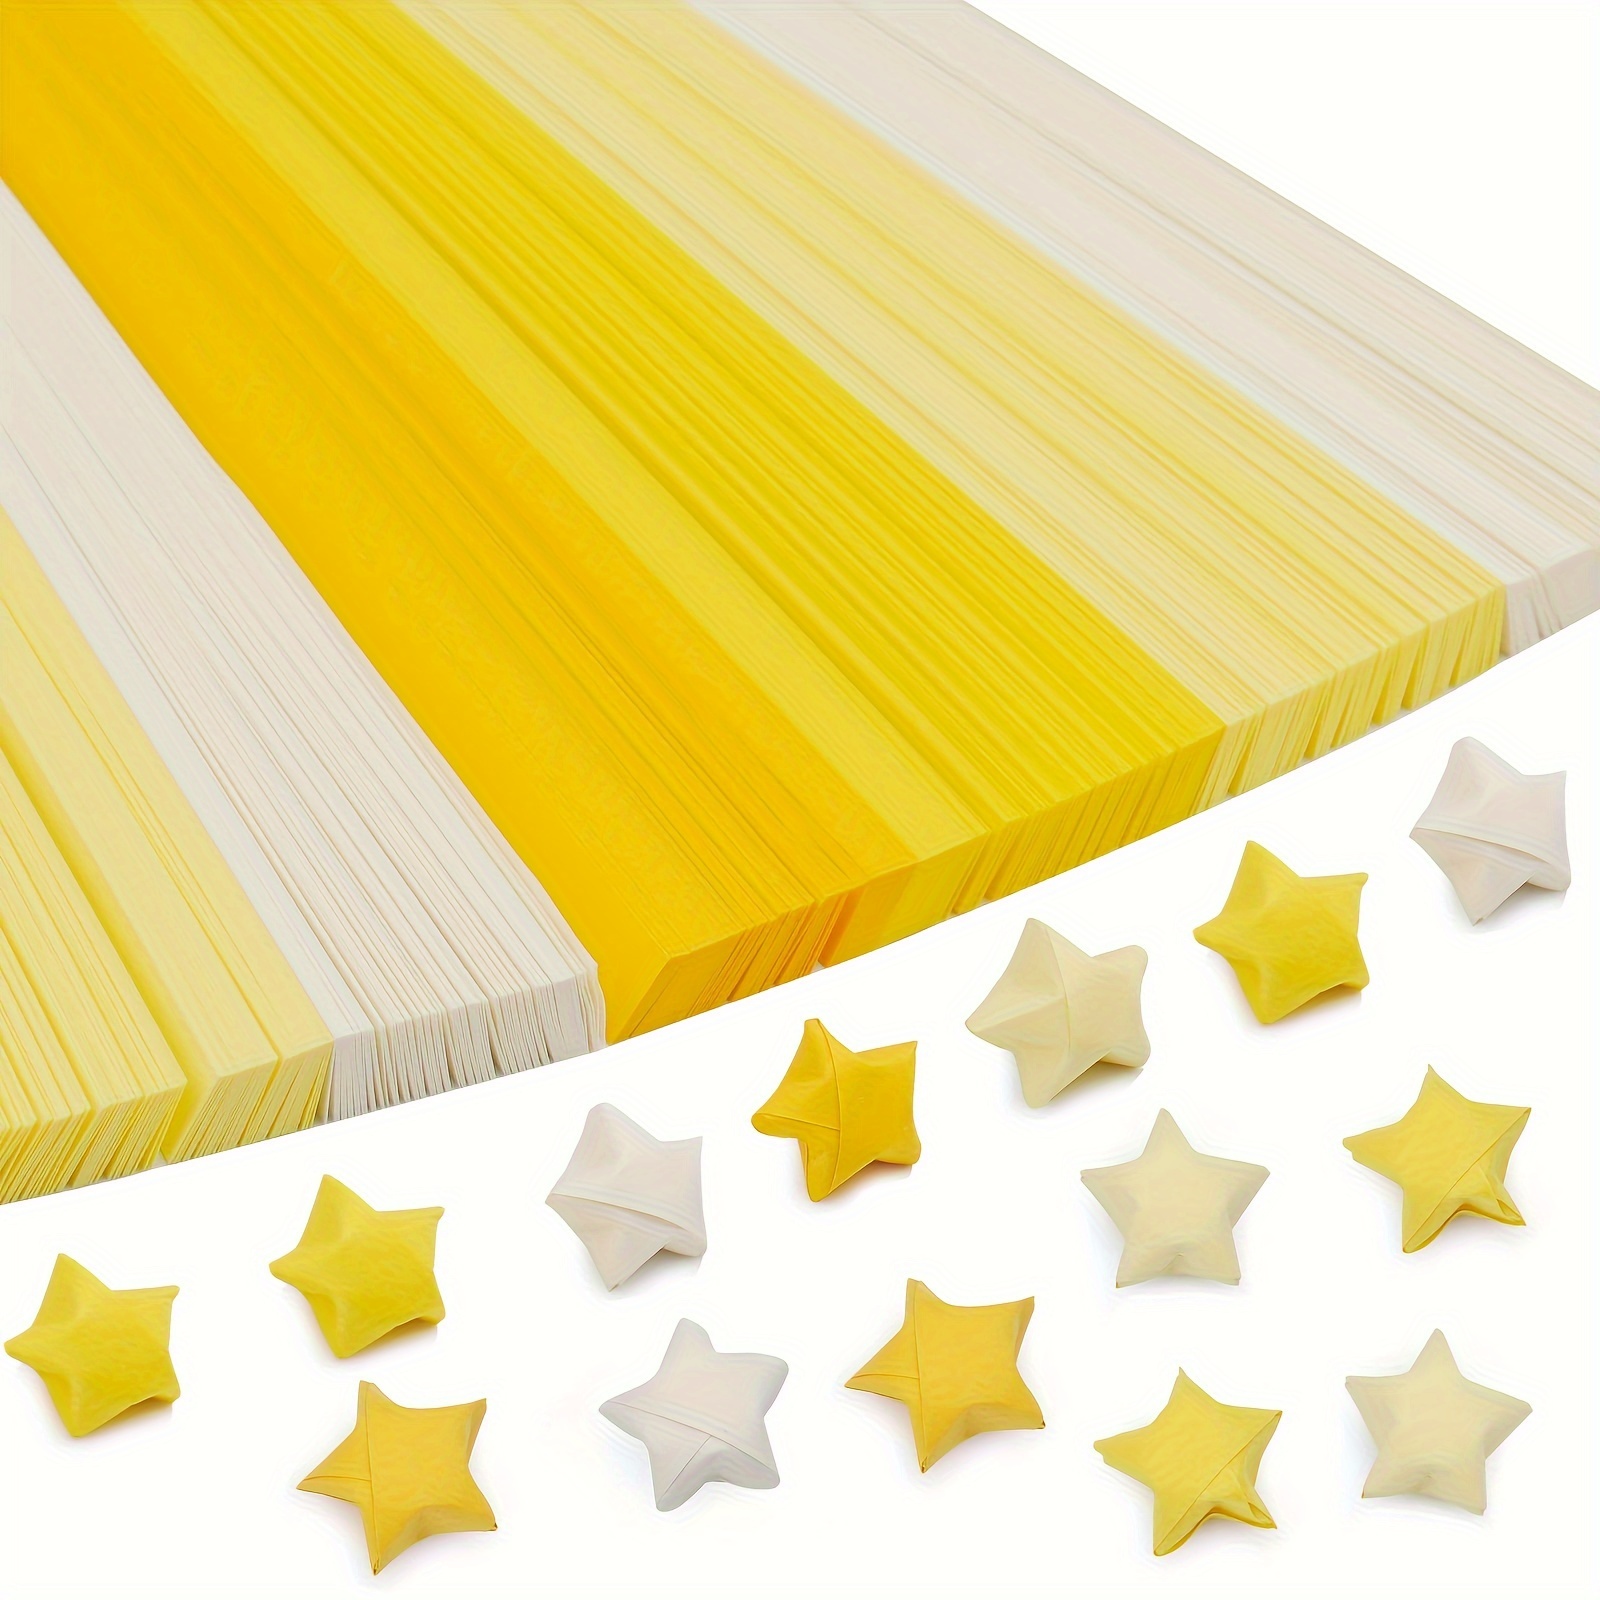  400 Sheets Origami Star Paper Strips Cute, 8 Vivid